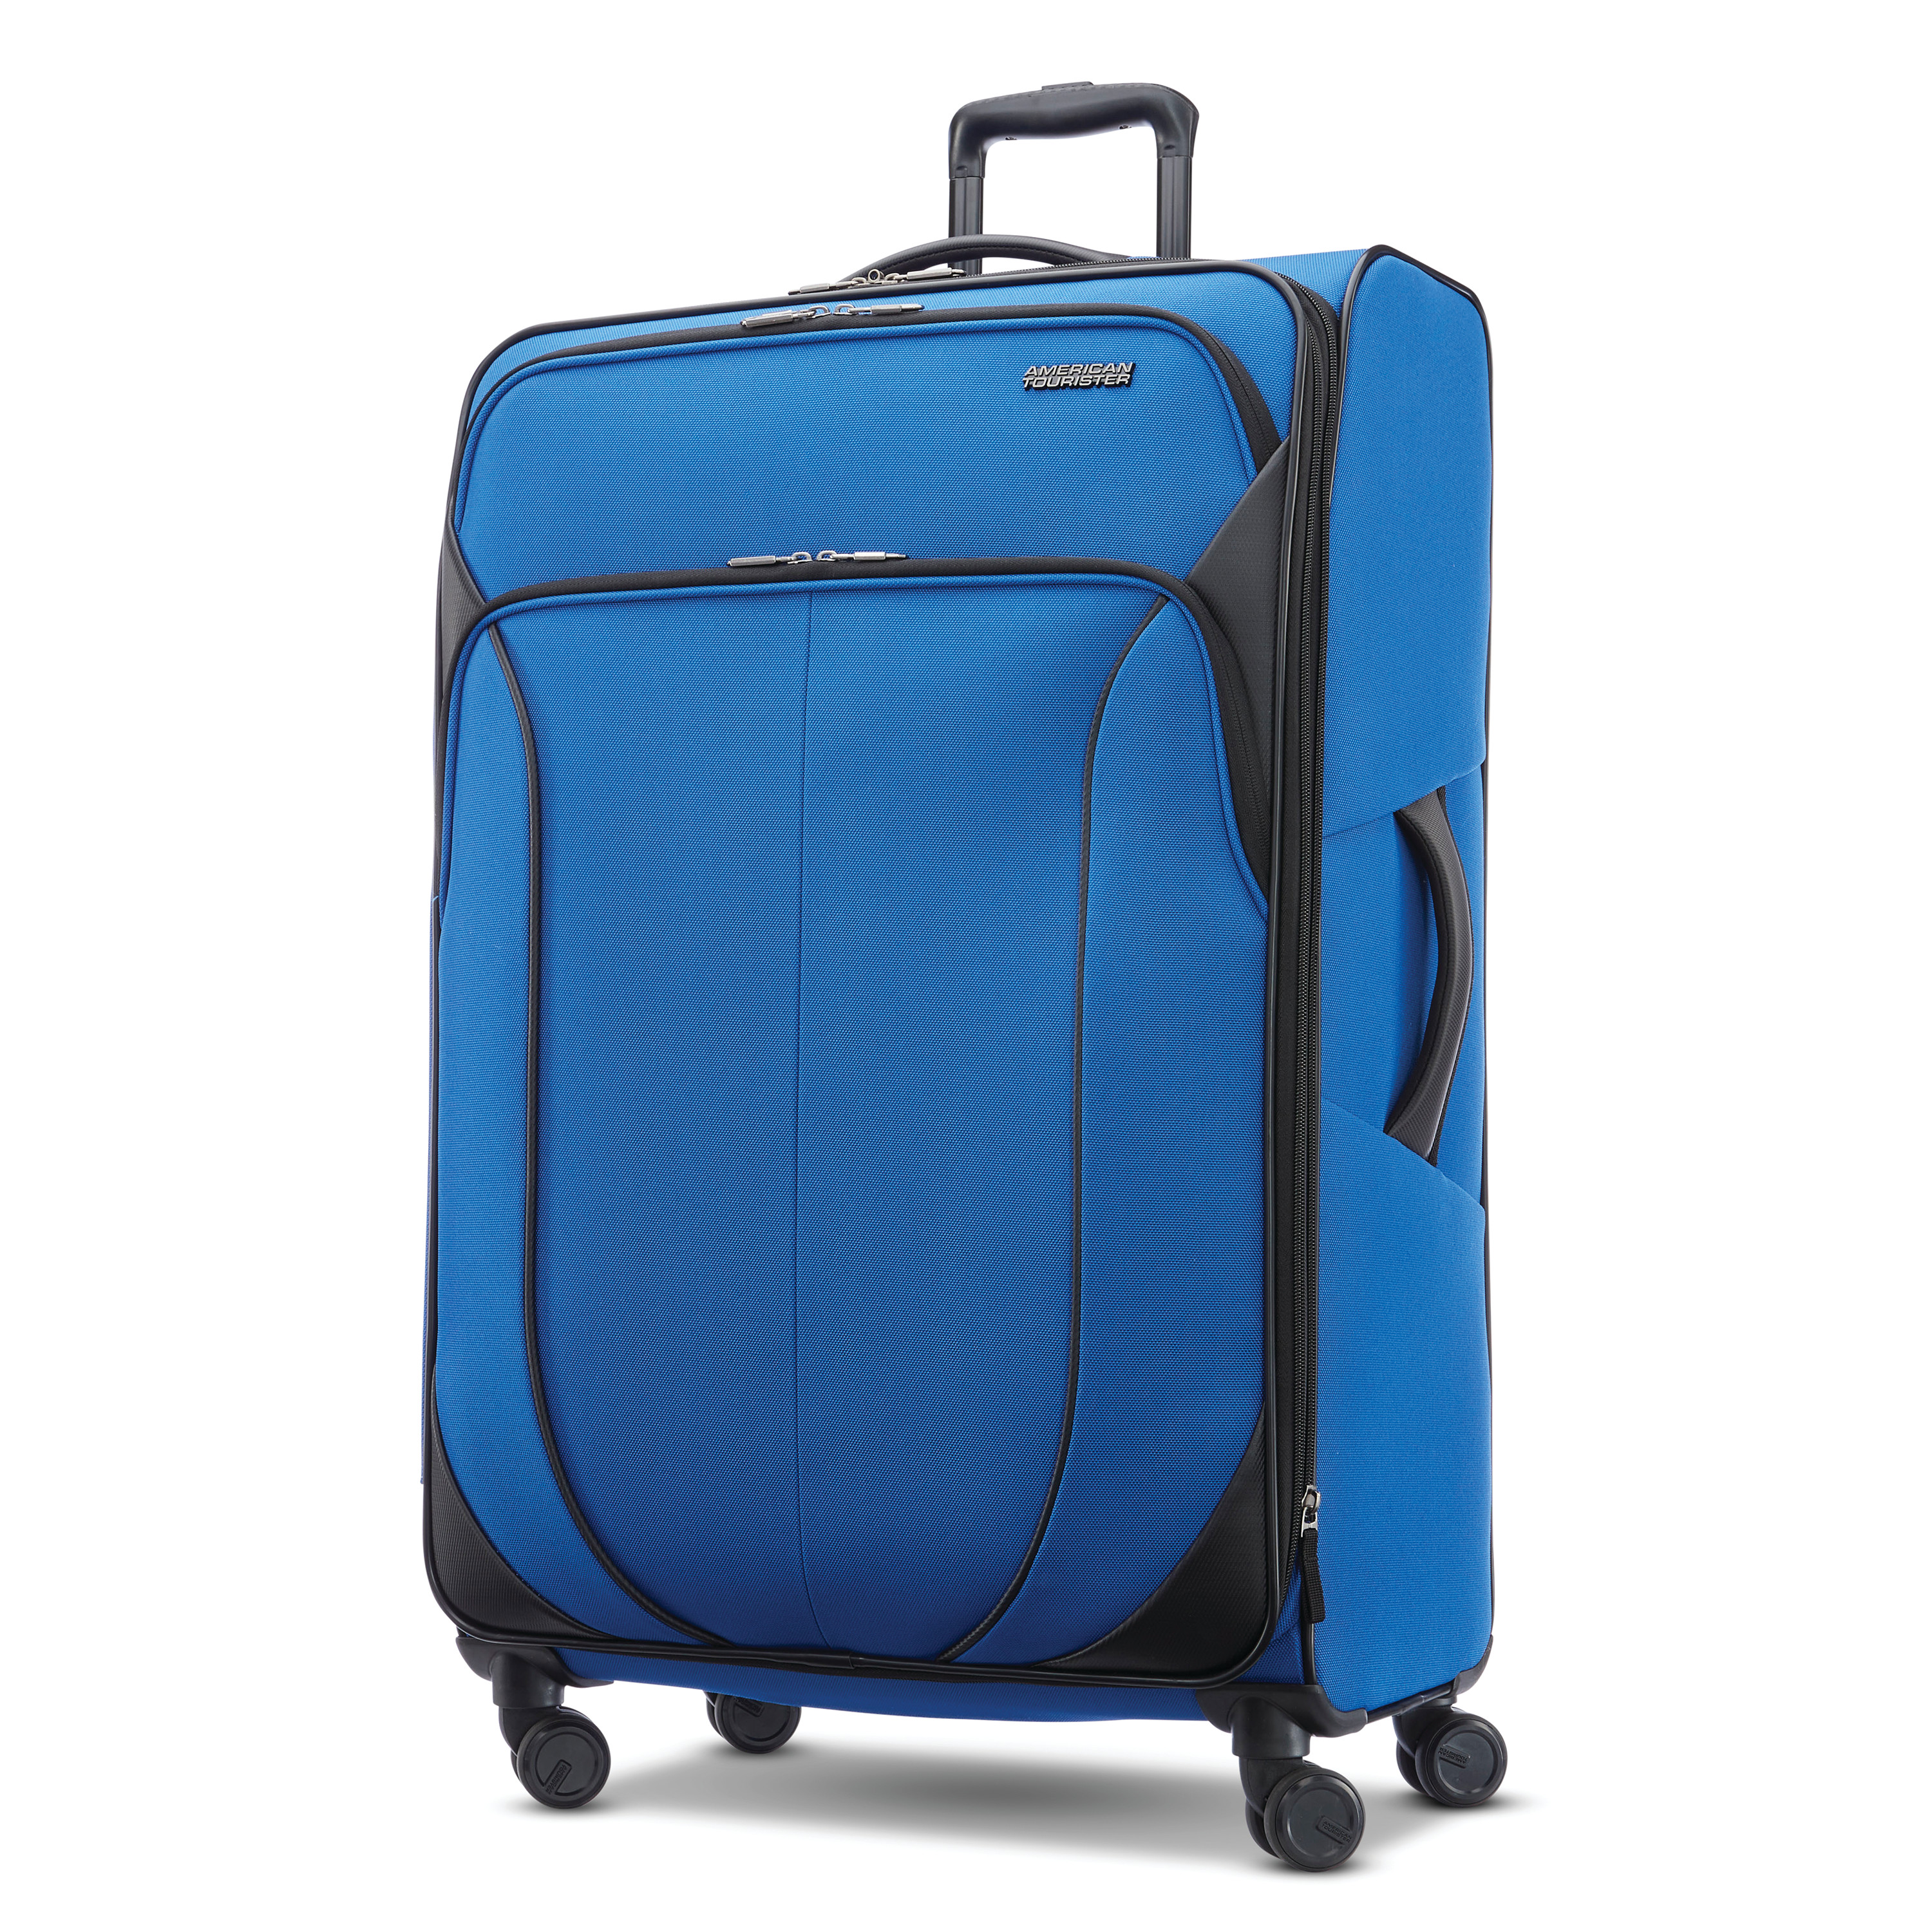 American Tourister 4 KIX 2.0 28" Upright Spinner Luggage - image 1 of 8